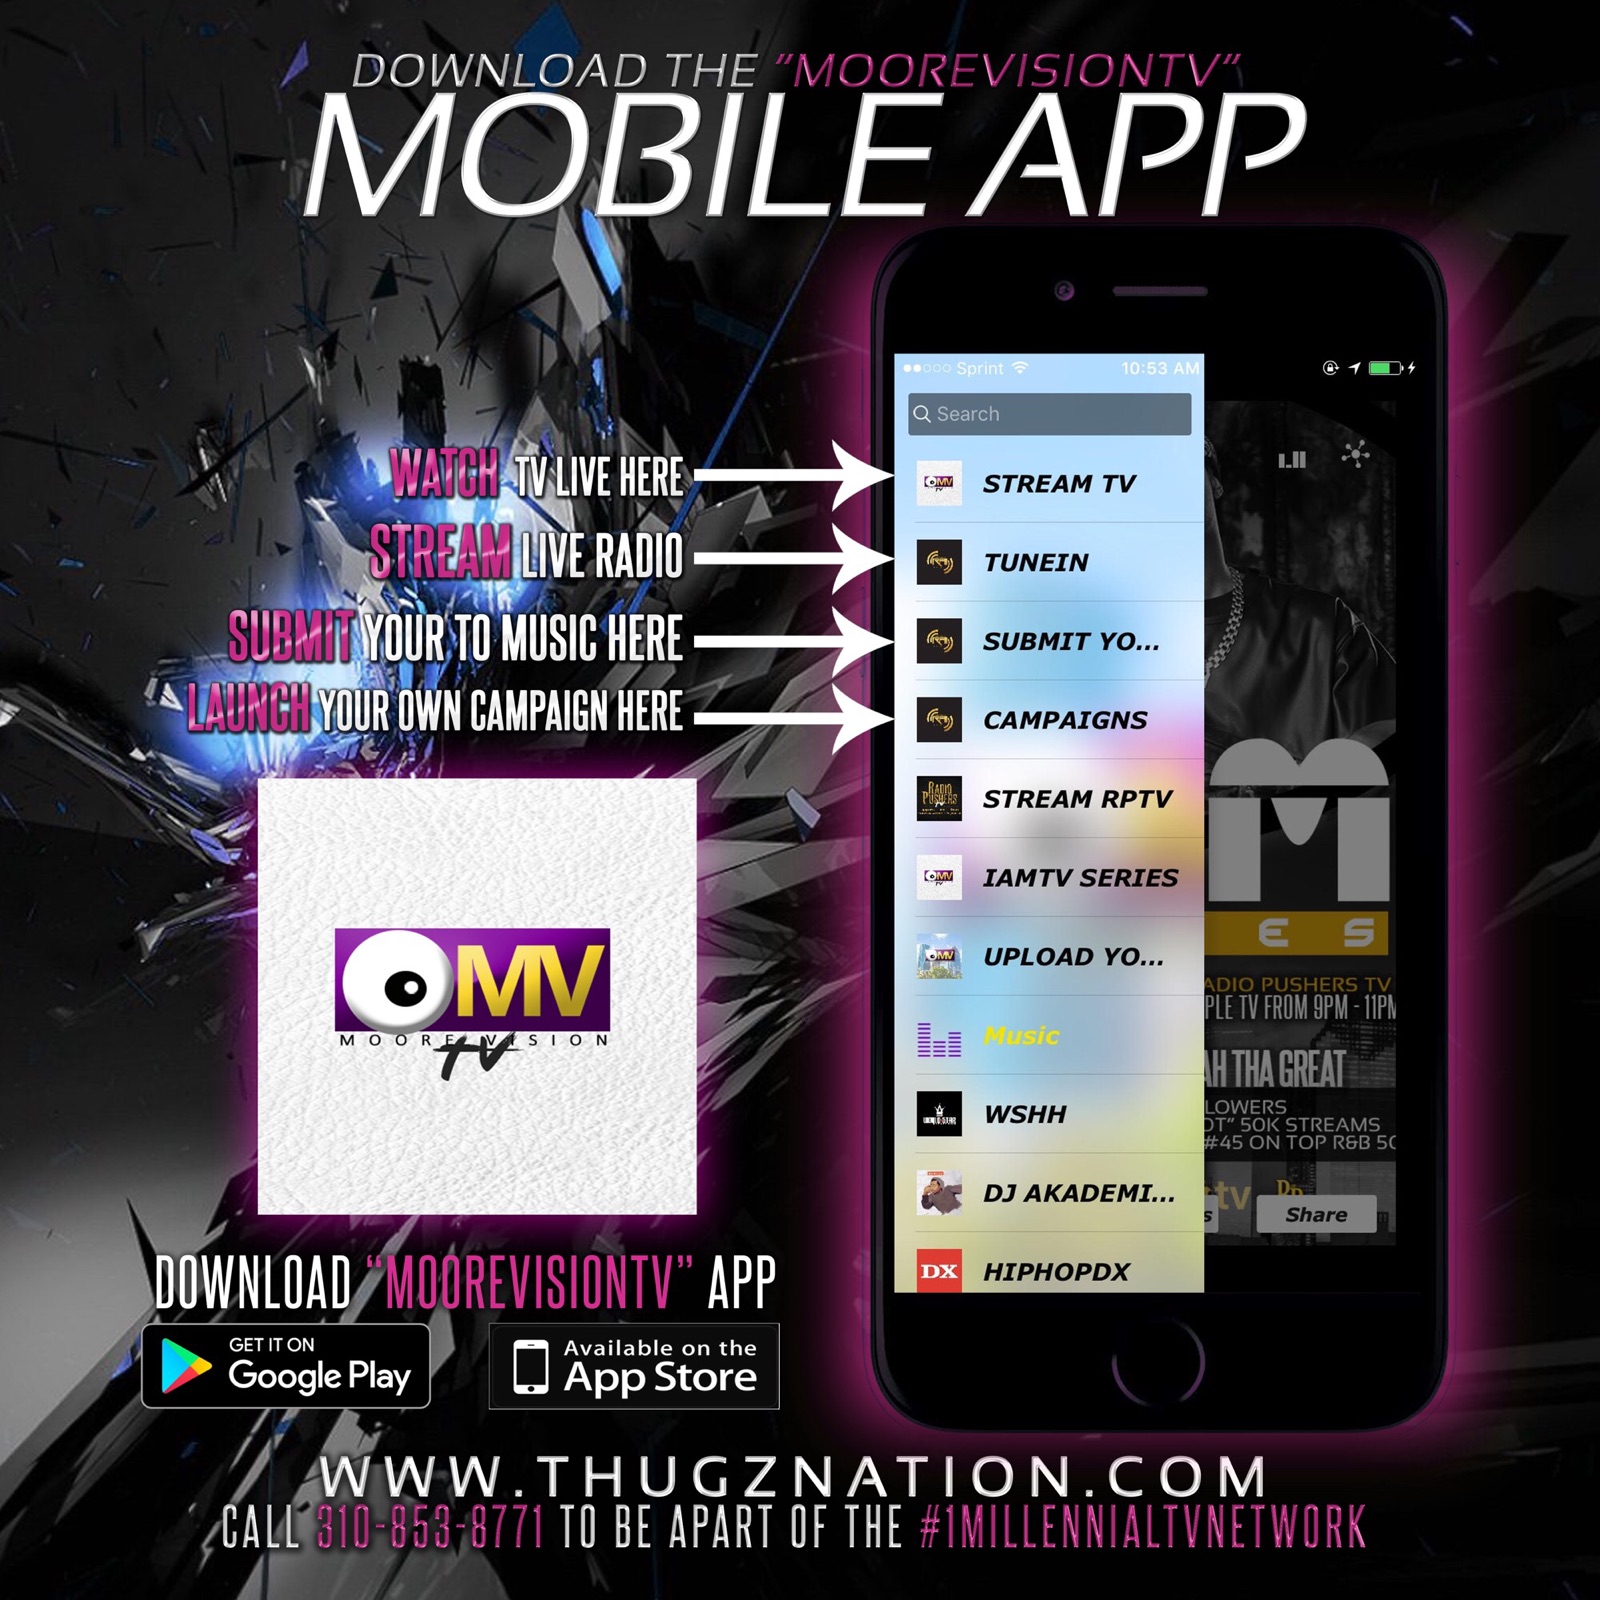 Check out "MOOREVISION" App on (Google Play) 

Rate it 5 Stars & Leave A Positive Comment.
Thanks.